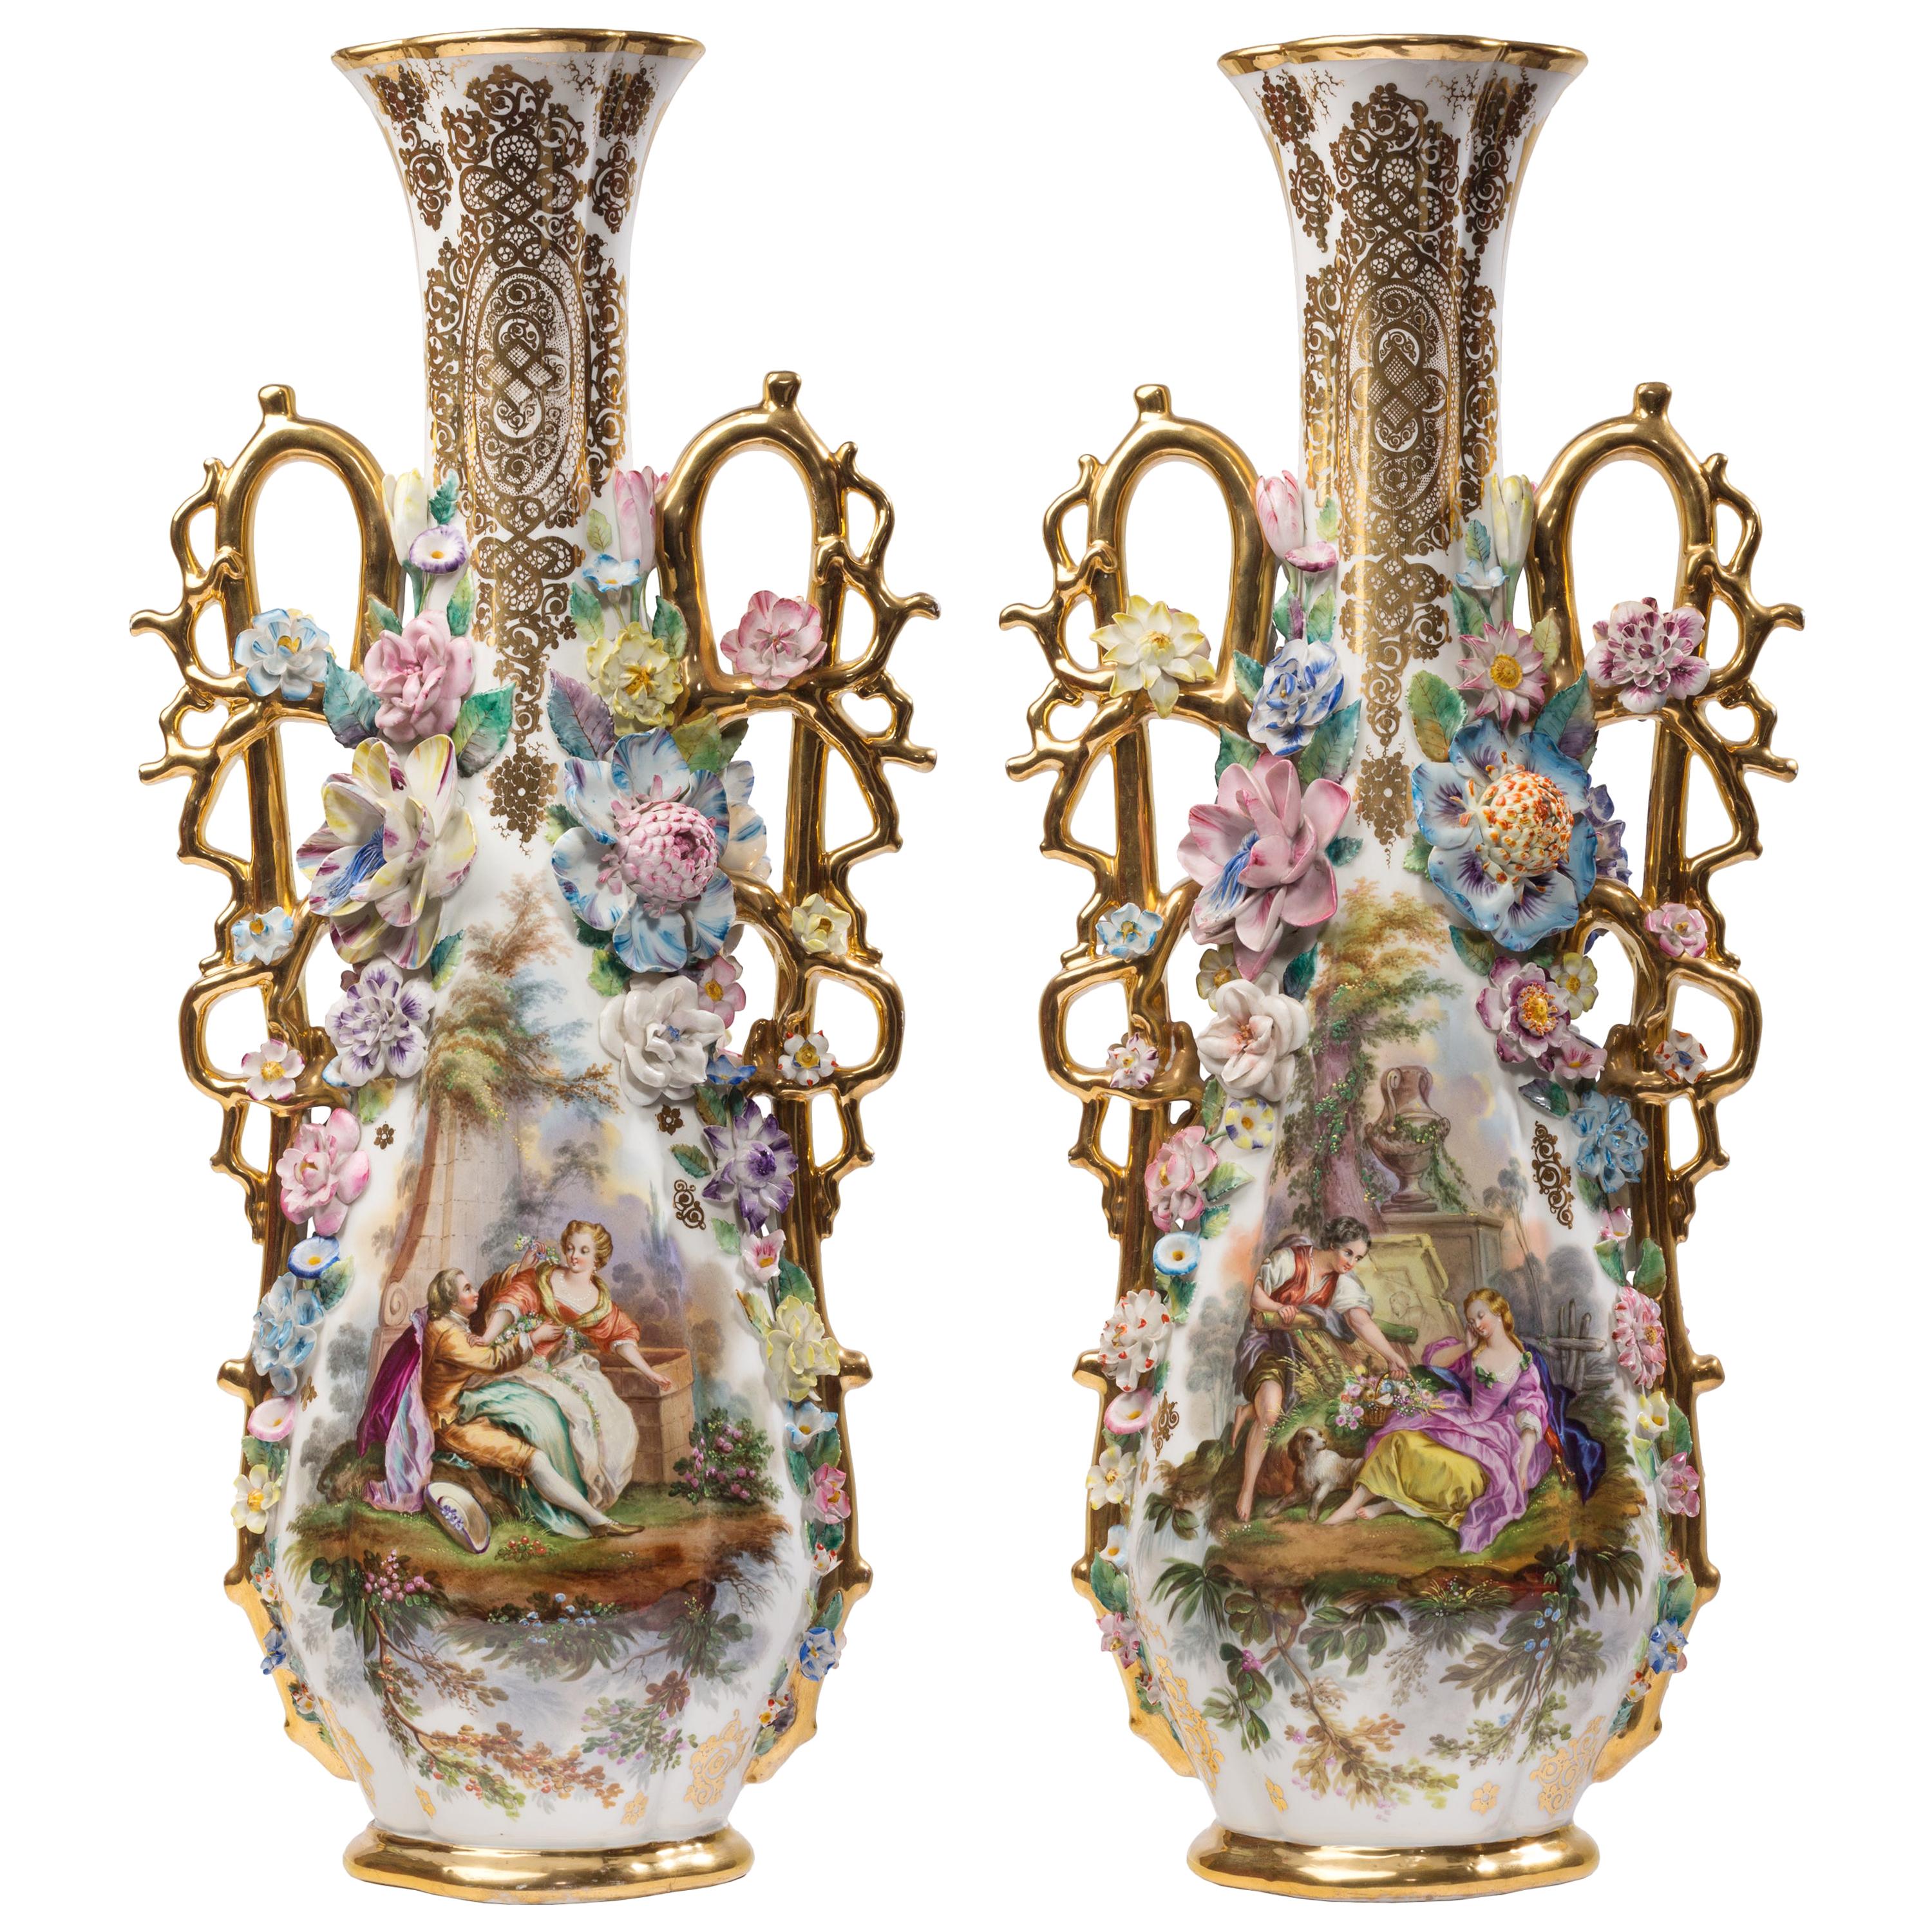 Pair of Highly Decorated Rococo Style French Porcelain Vases, Att. Jacob  Petit For Sale at 1stDibs